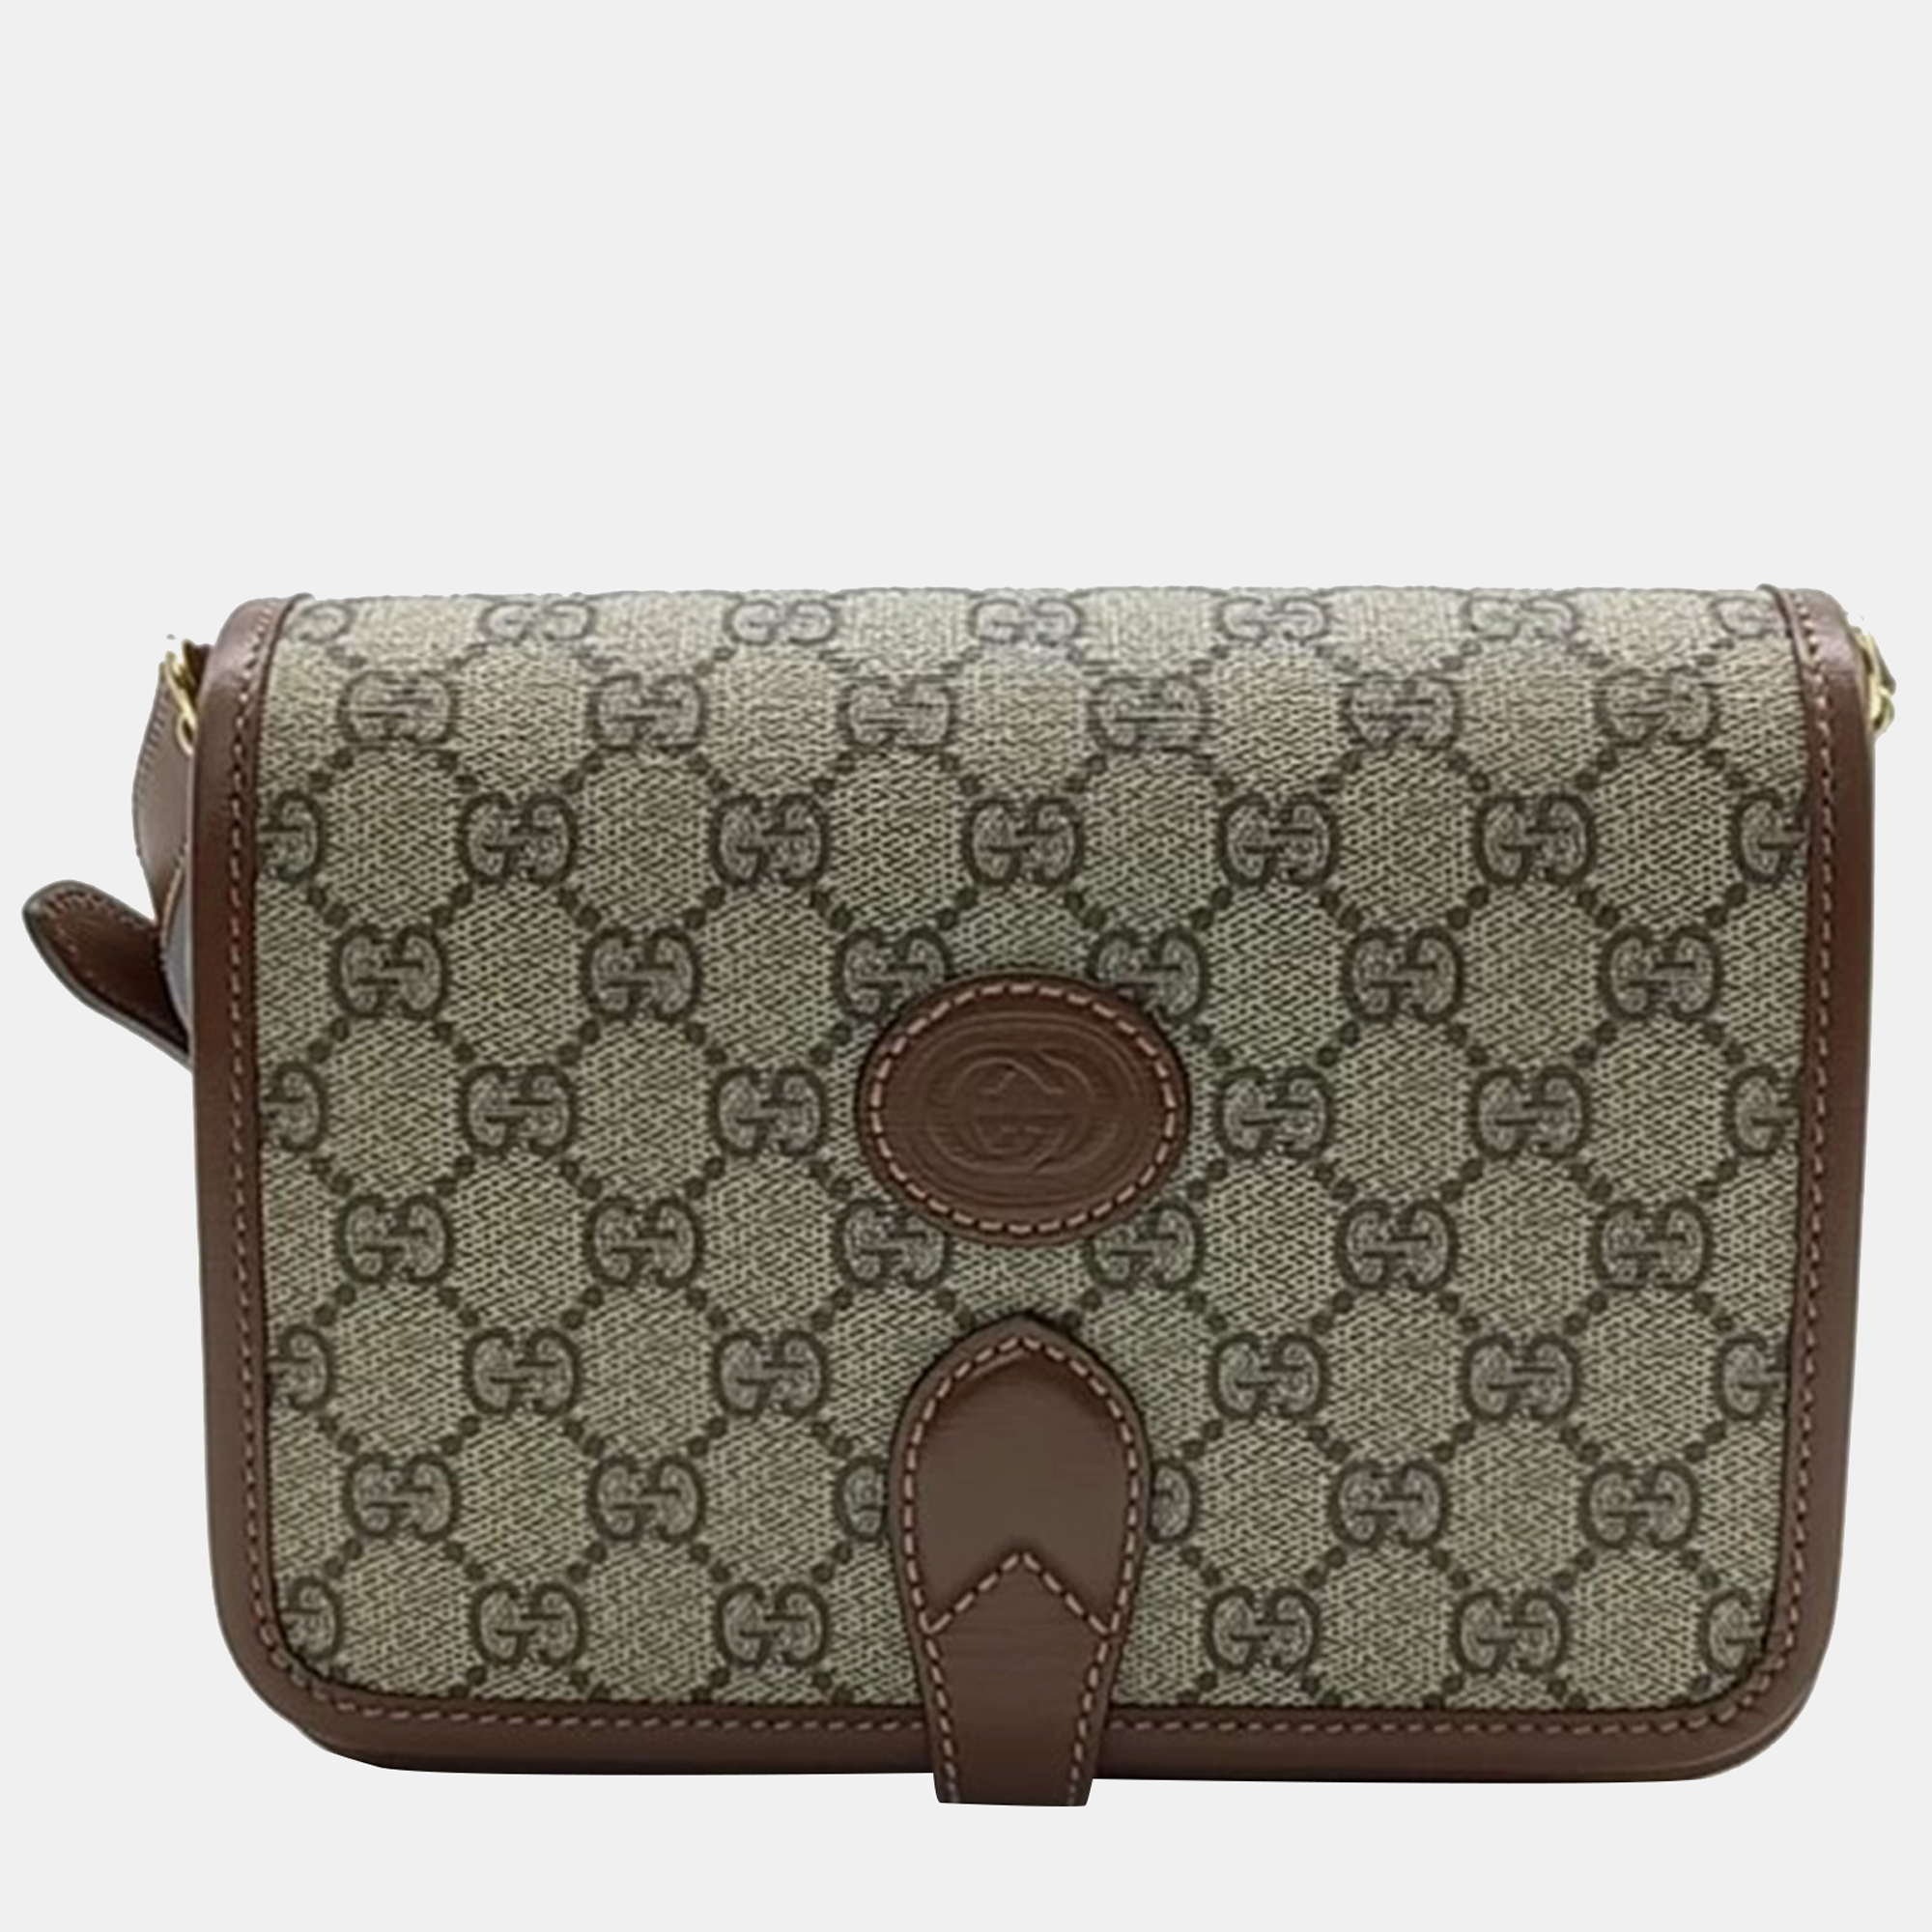 Gucci beige/brown gg canvas and leather retro shoulder bag